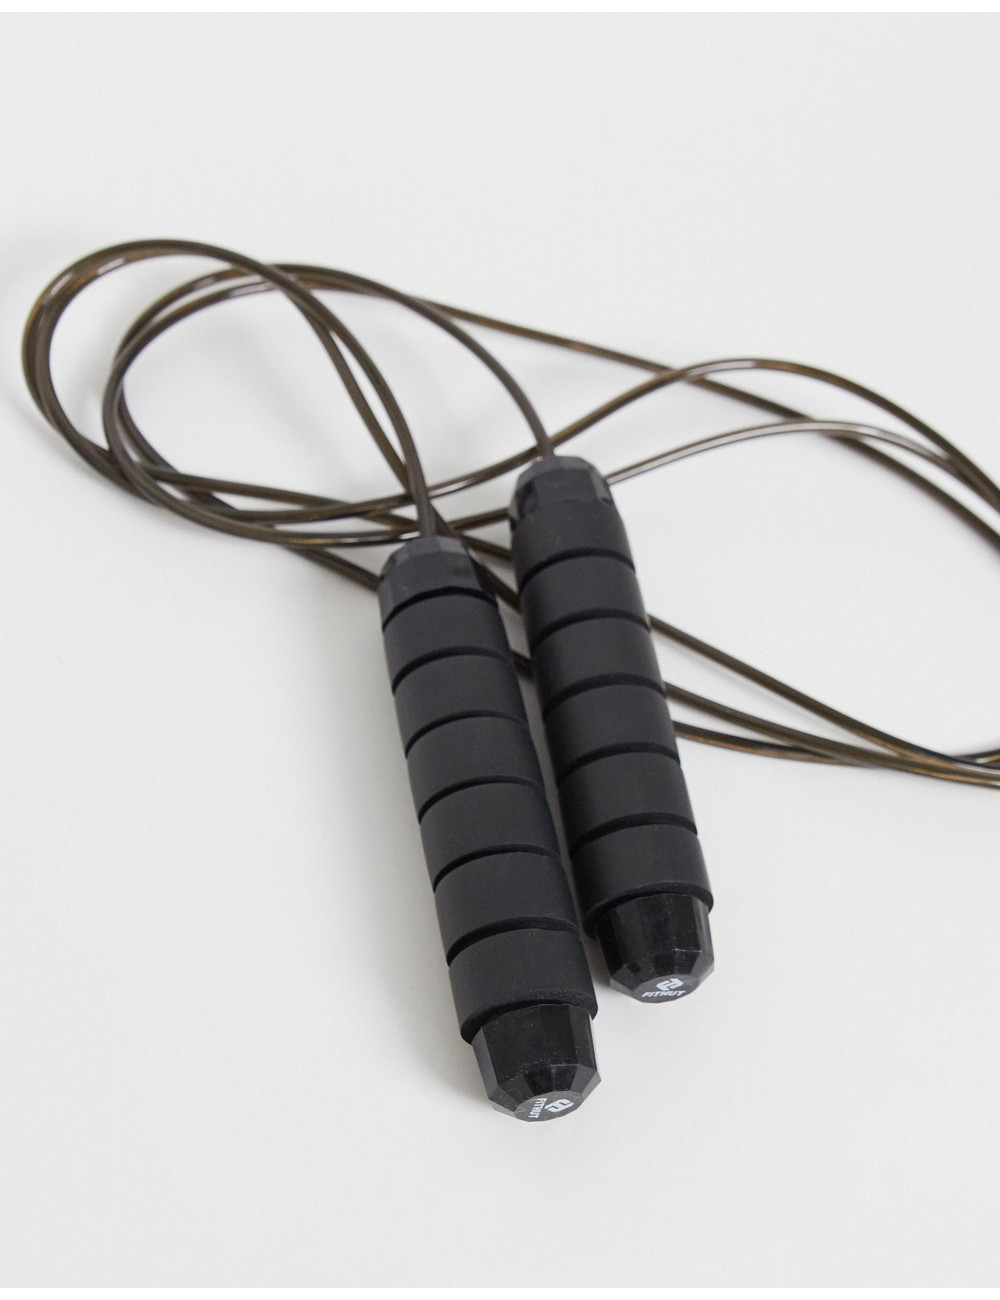 FitHut 2.8m skipping rope...